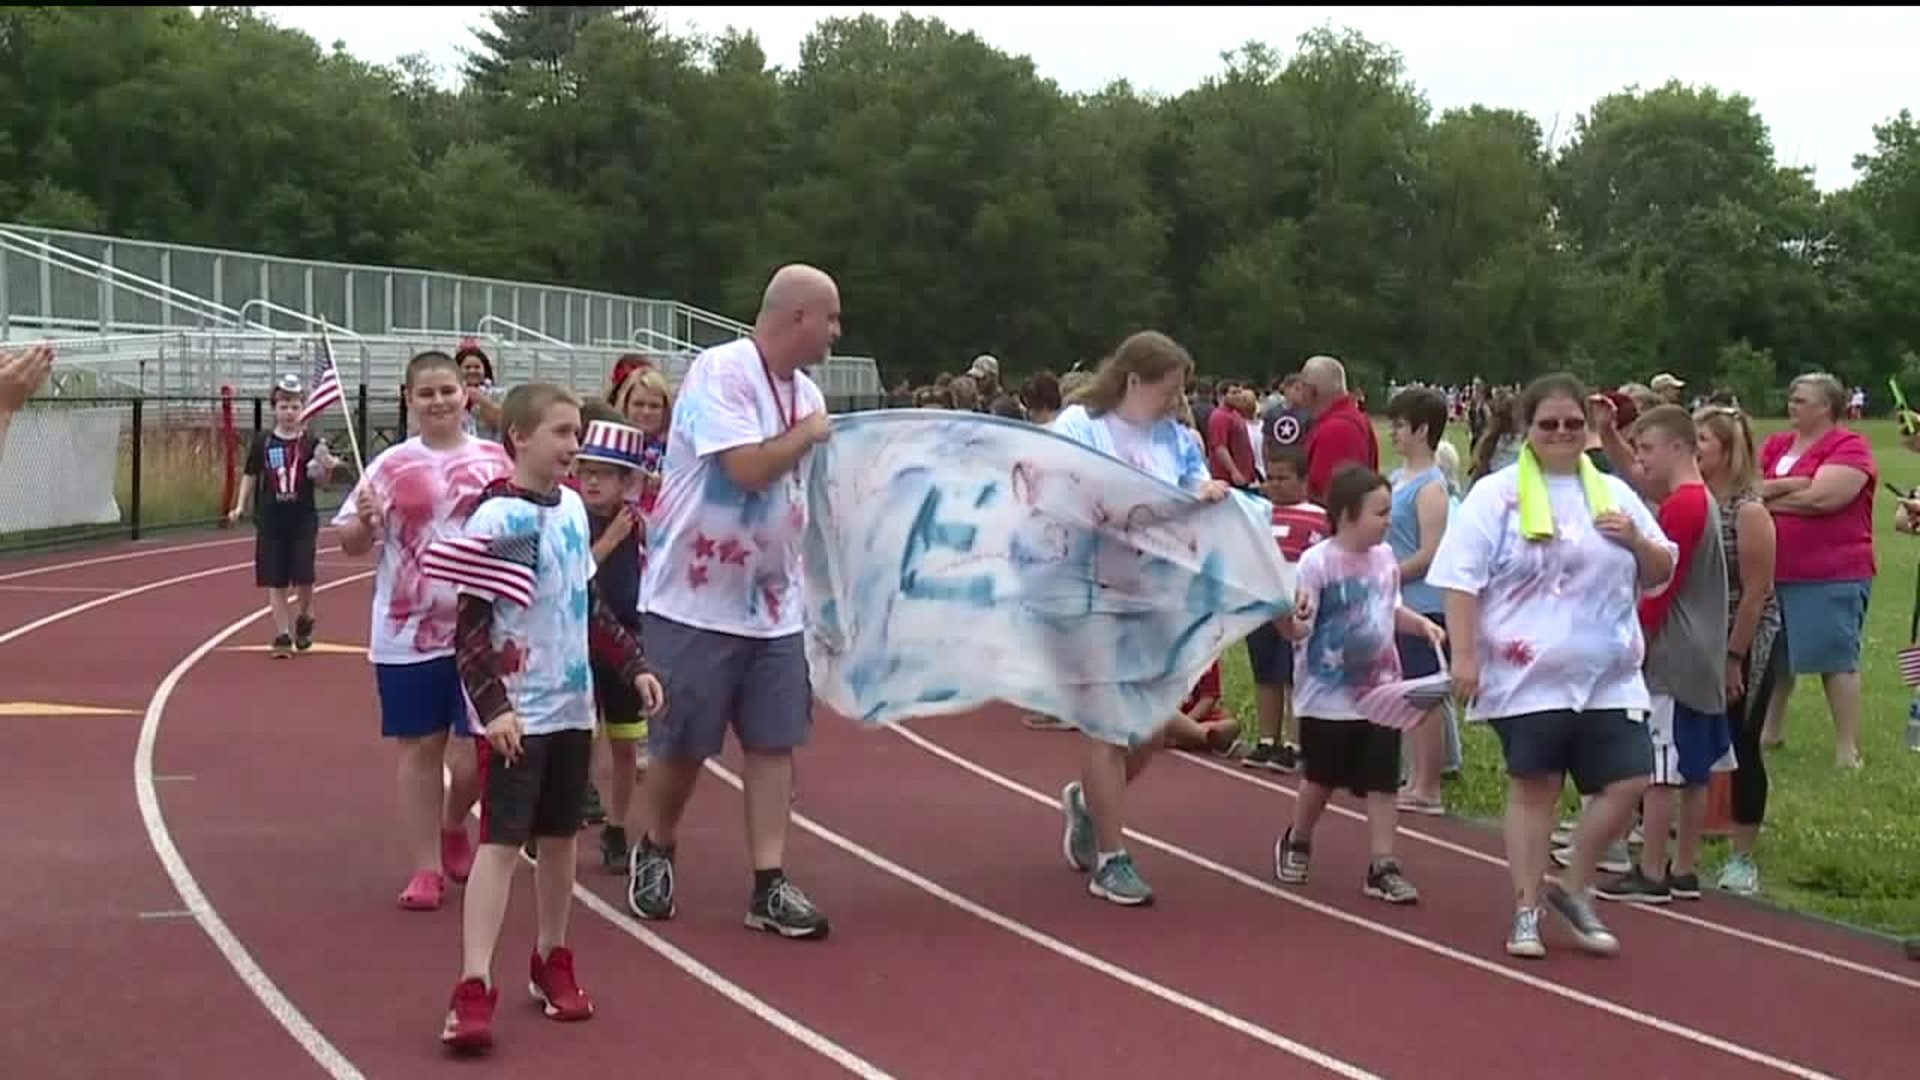 Students with Special Needs March in Parade